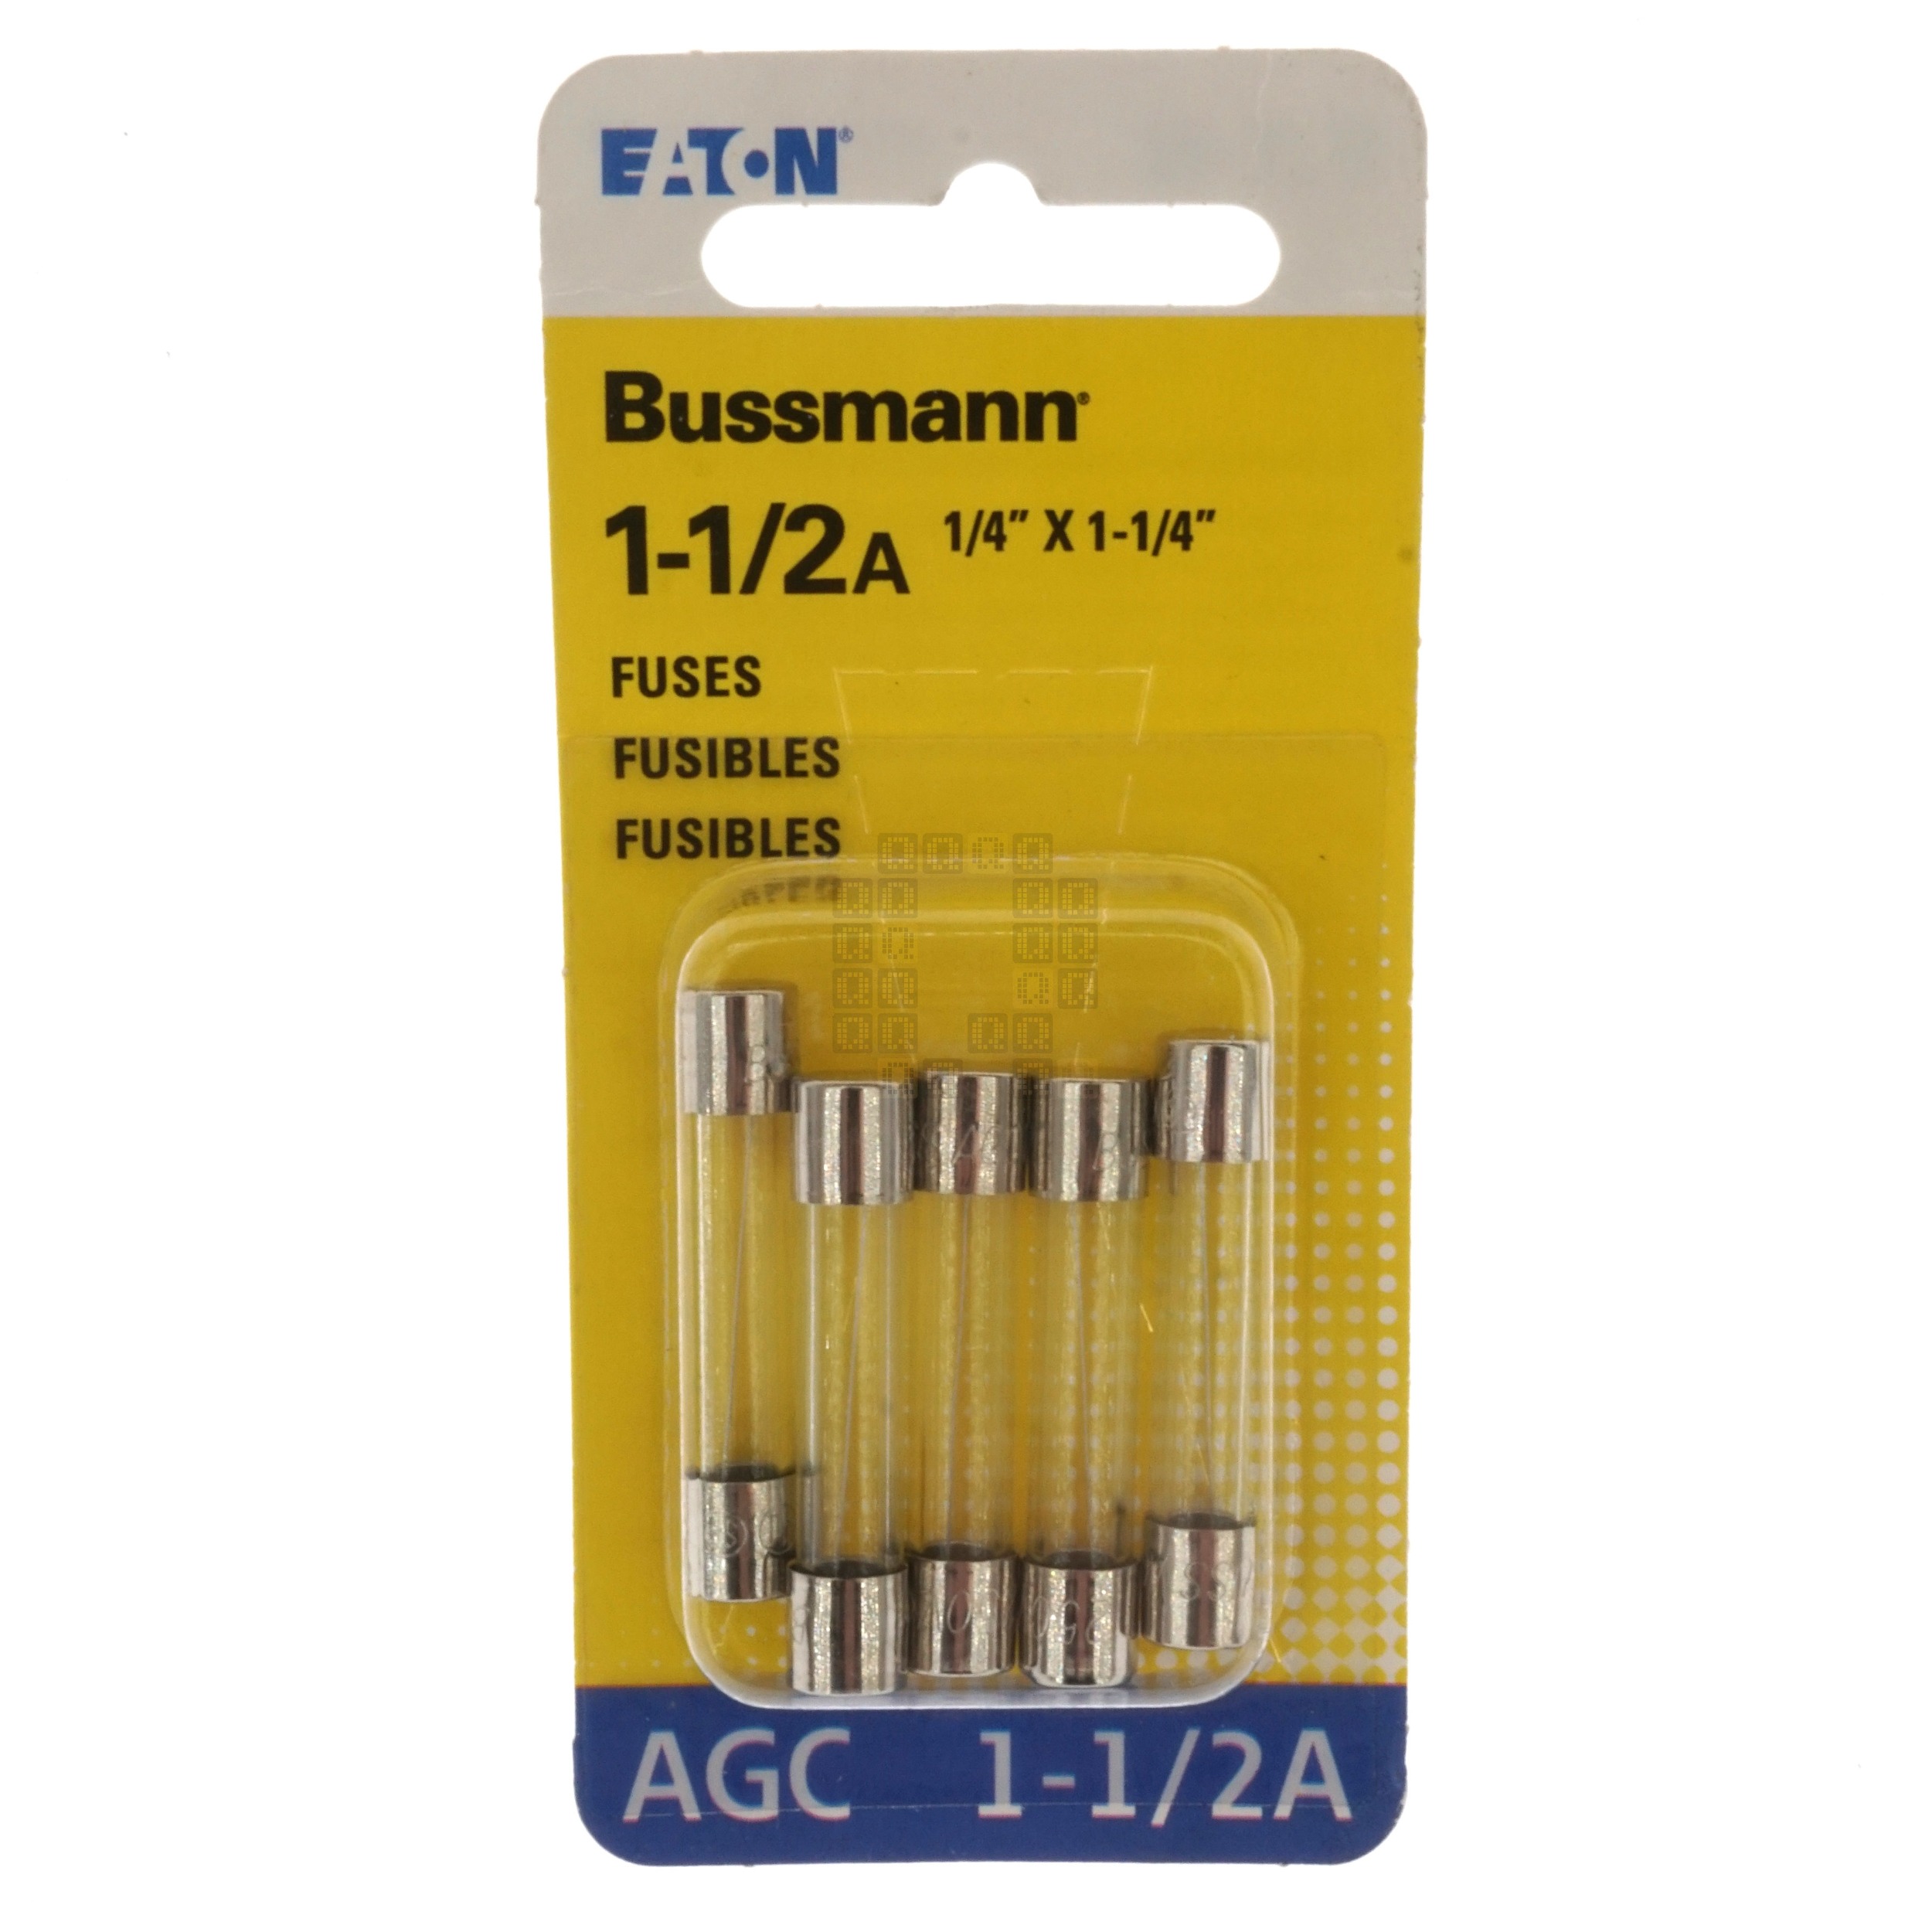 Eaton Bussman BP/AGC-1-1/2-RP Fast Acting Glass Fuse 5 Pack, 1-1/2 Amp, 250VAC